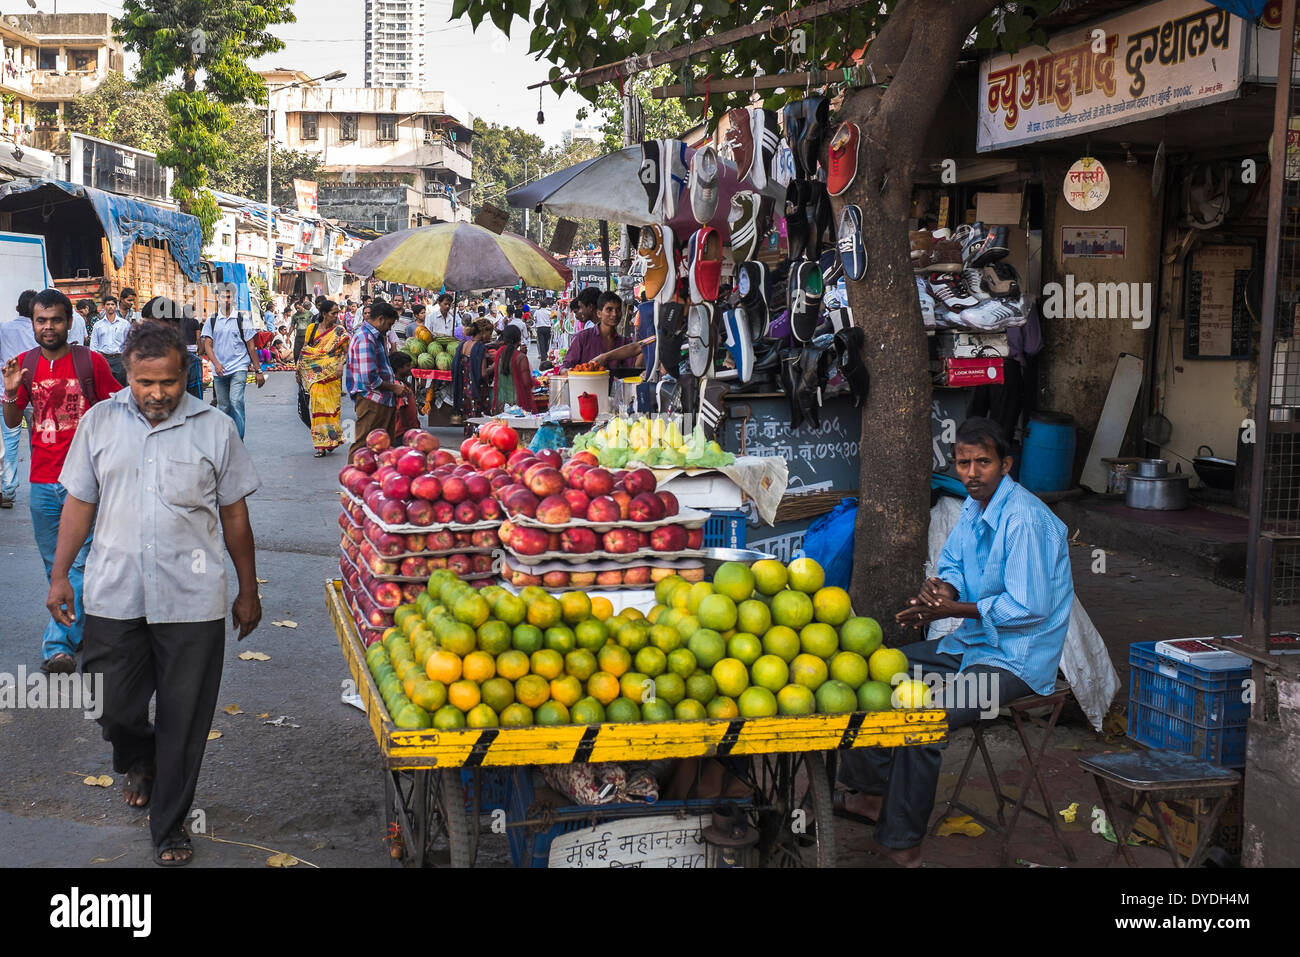 A fruit vendor tending to his stall in a busy street market. Stock Photo